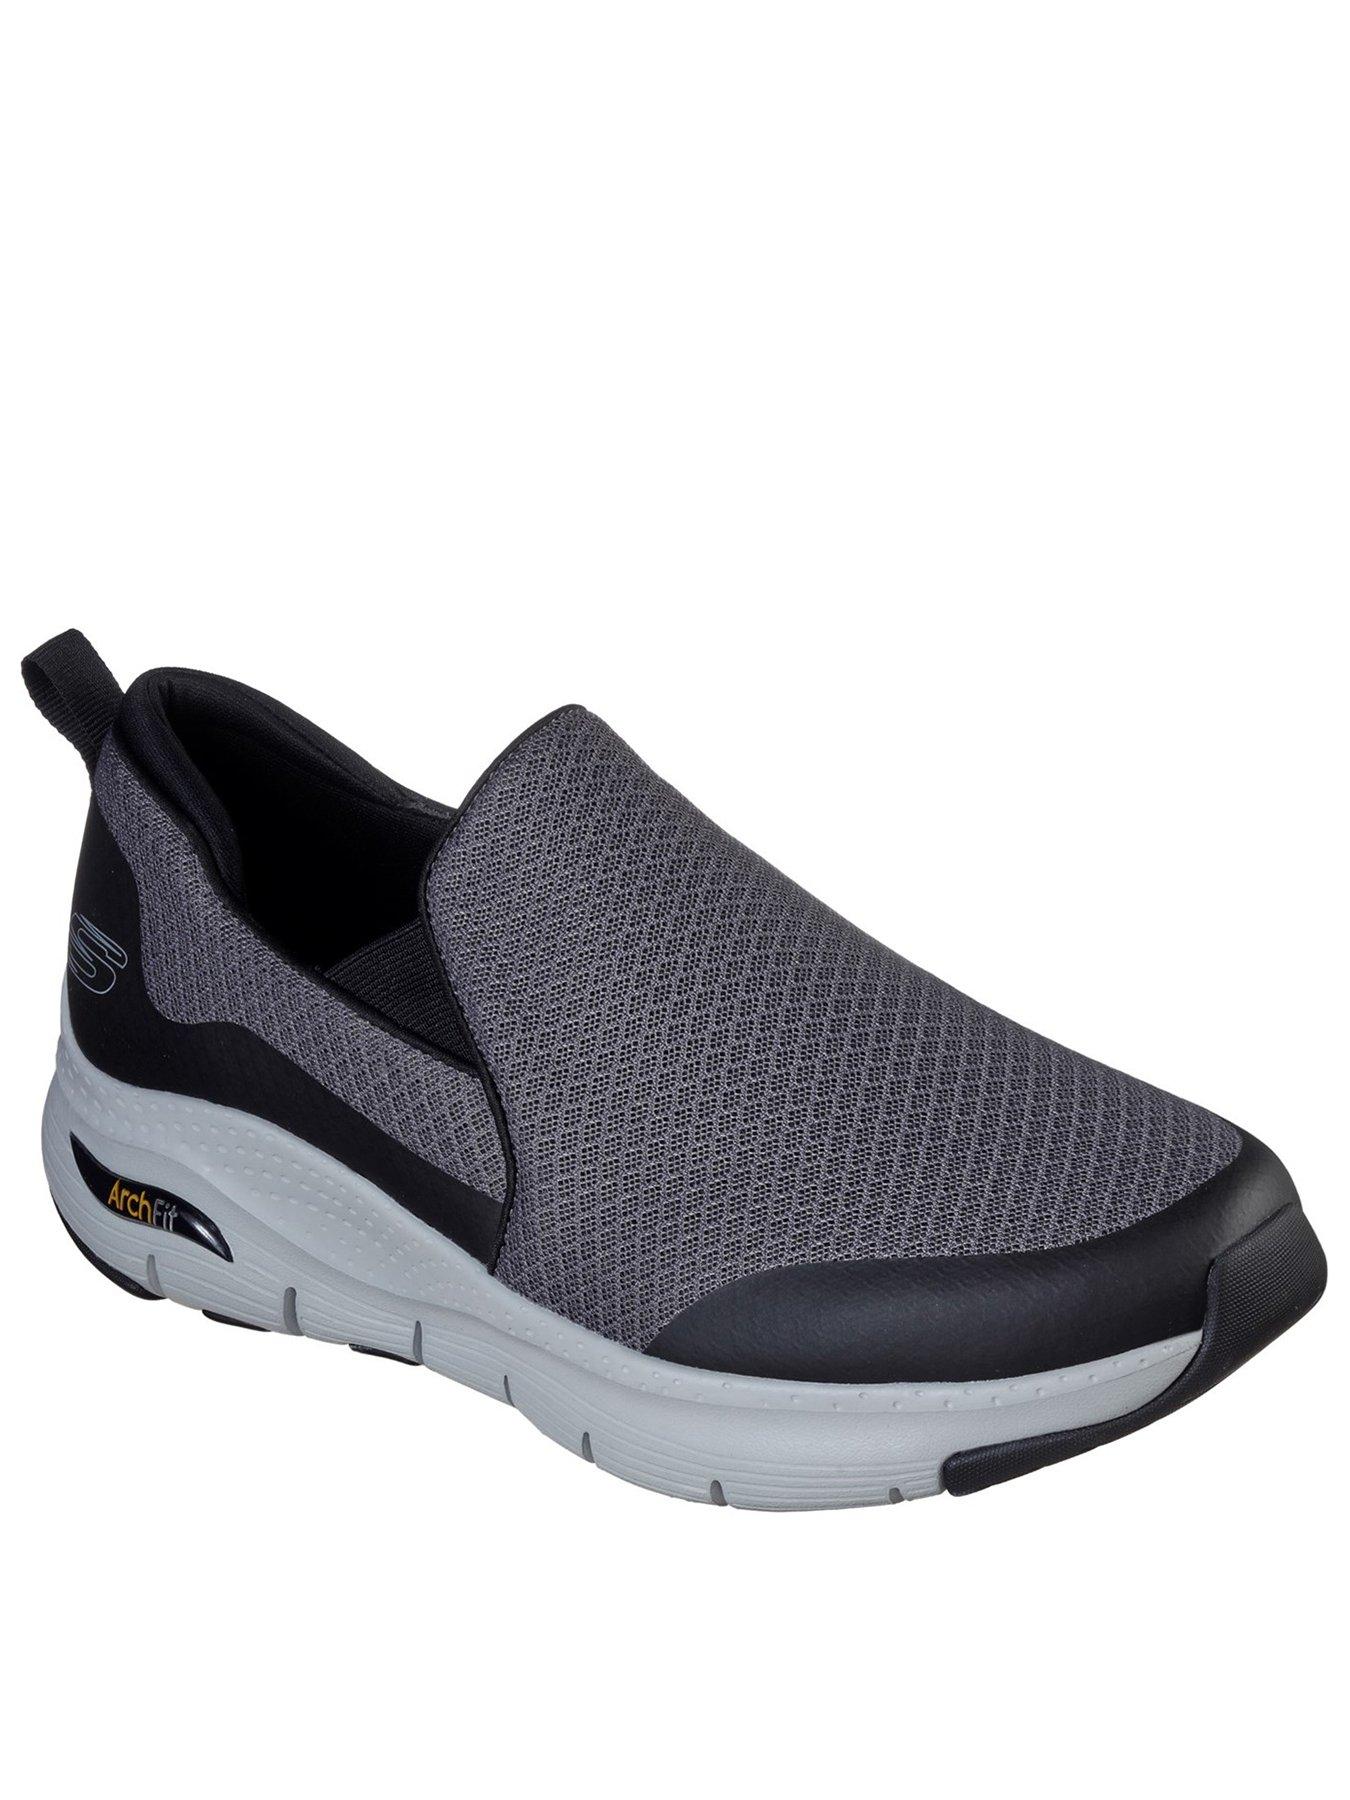  Arch Fit Banlin - Charcoal Black